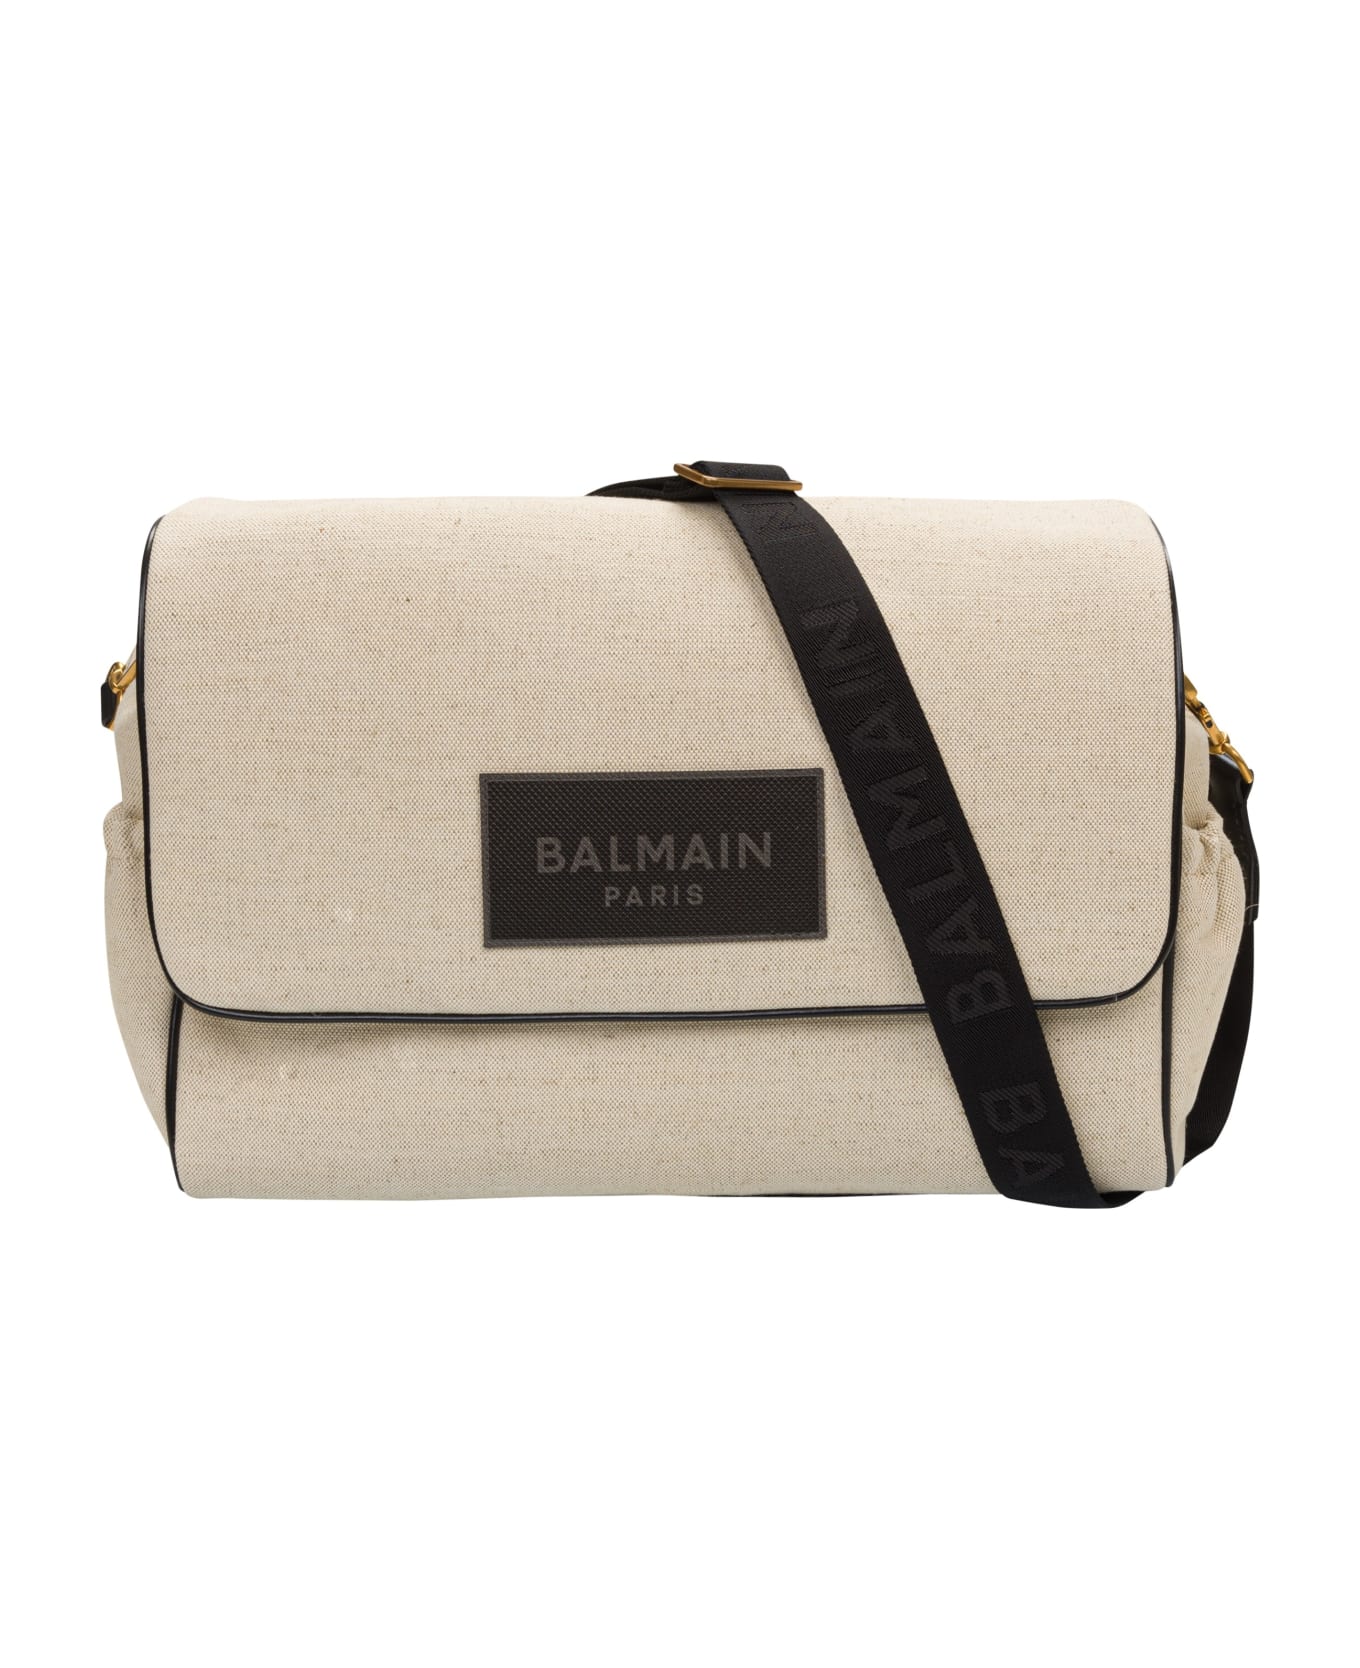 Balmain Changing Bag With Application - Ivory